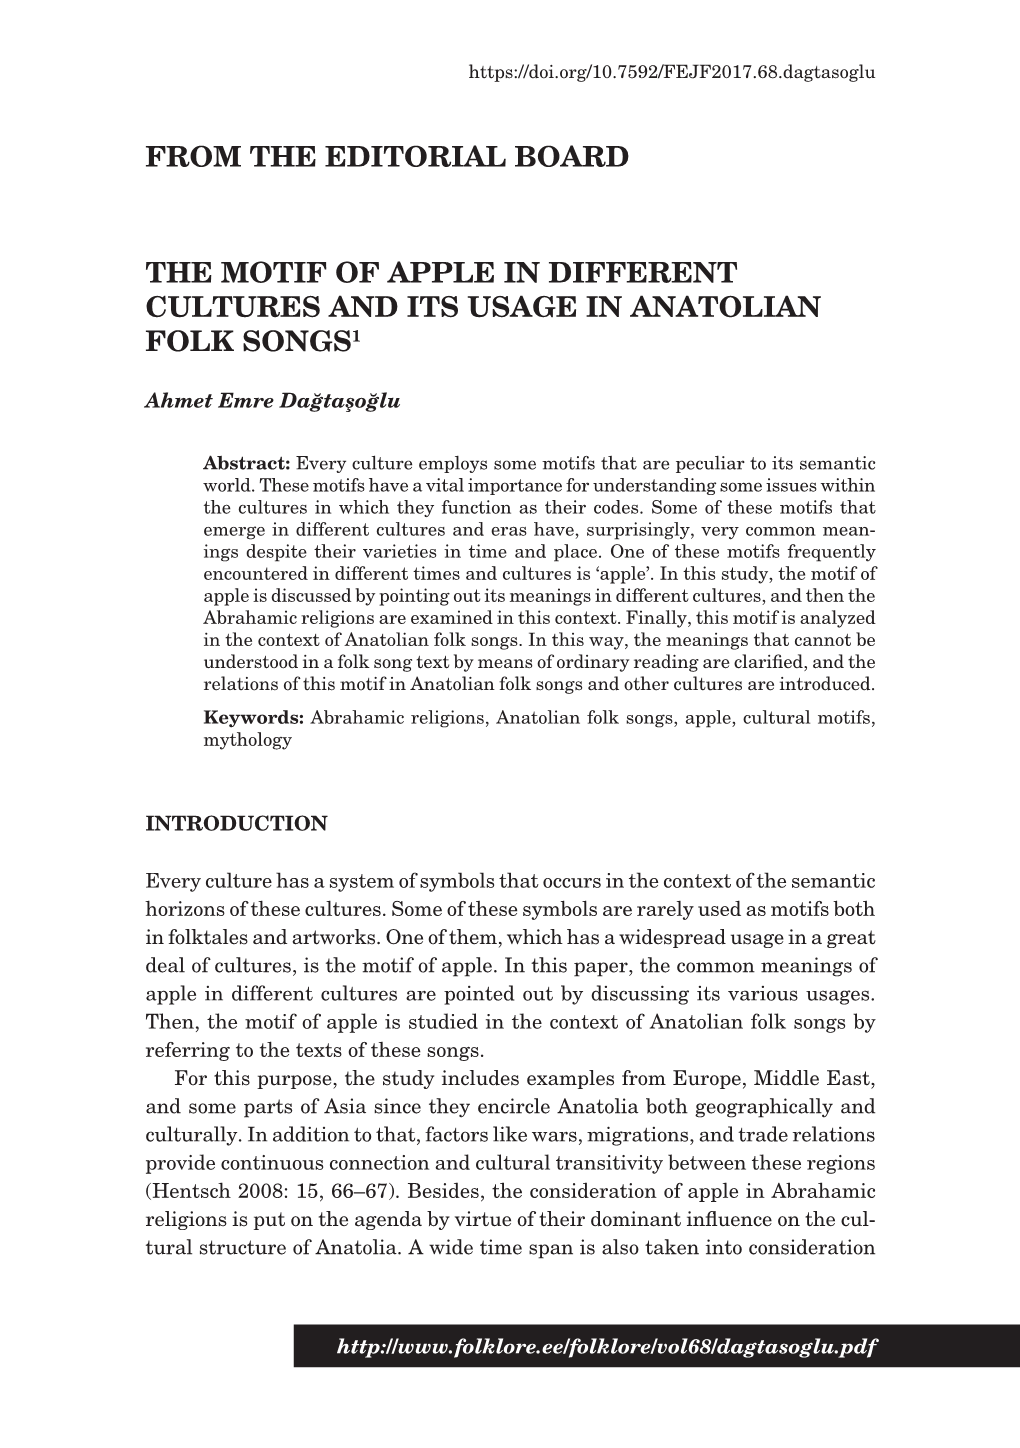 The Motif of Apple in Different Cultures and Its Usage in Anatolian Folk Songs1